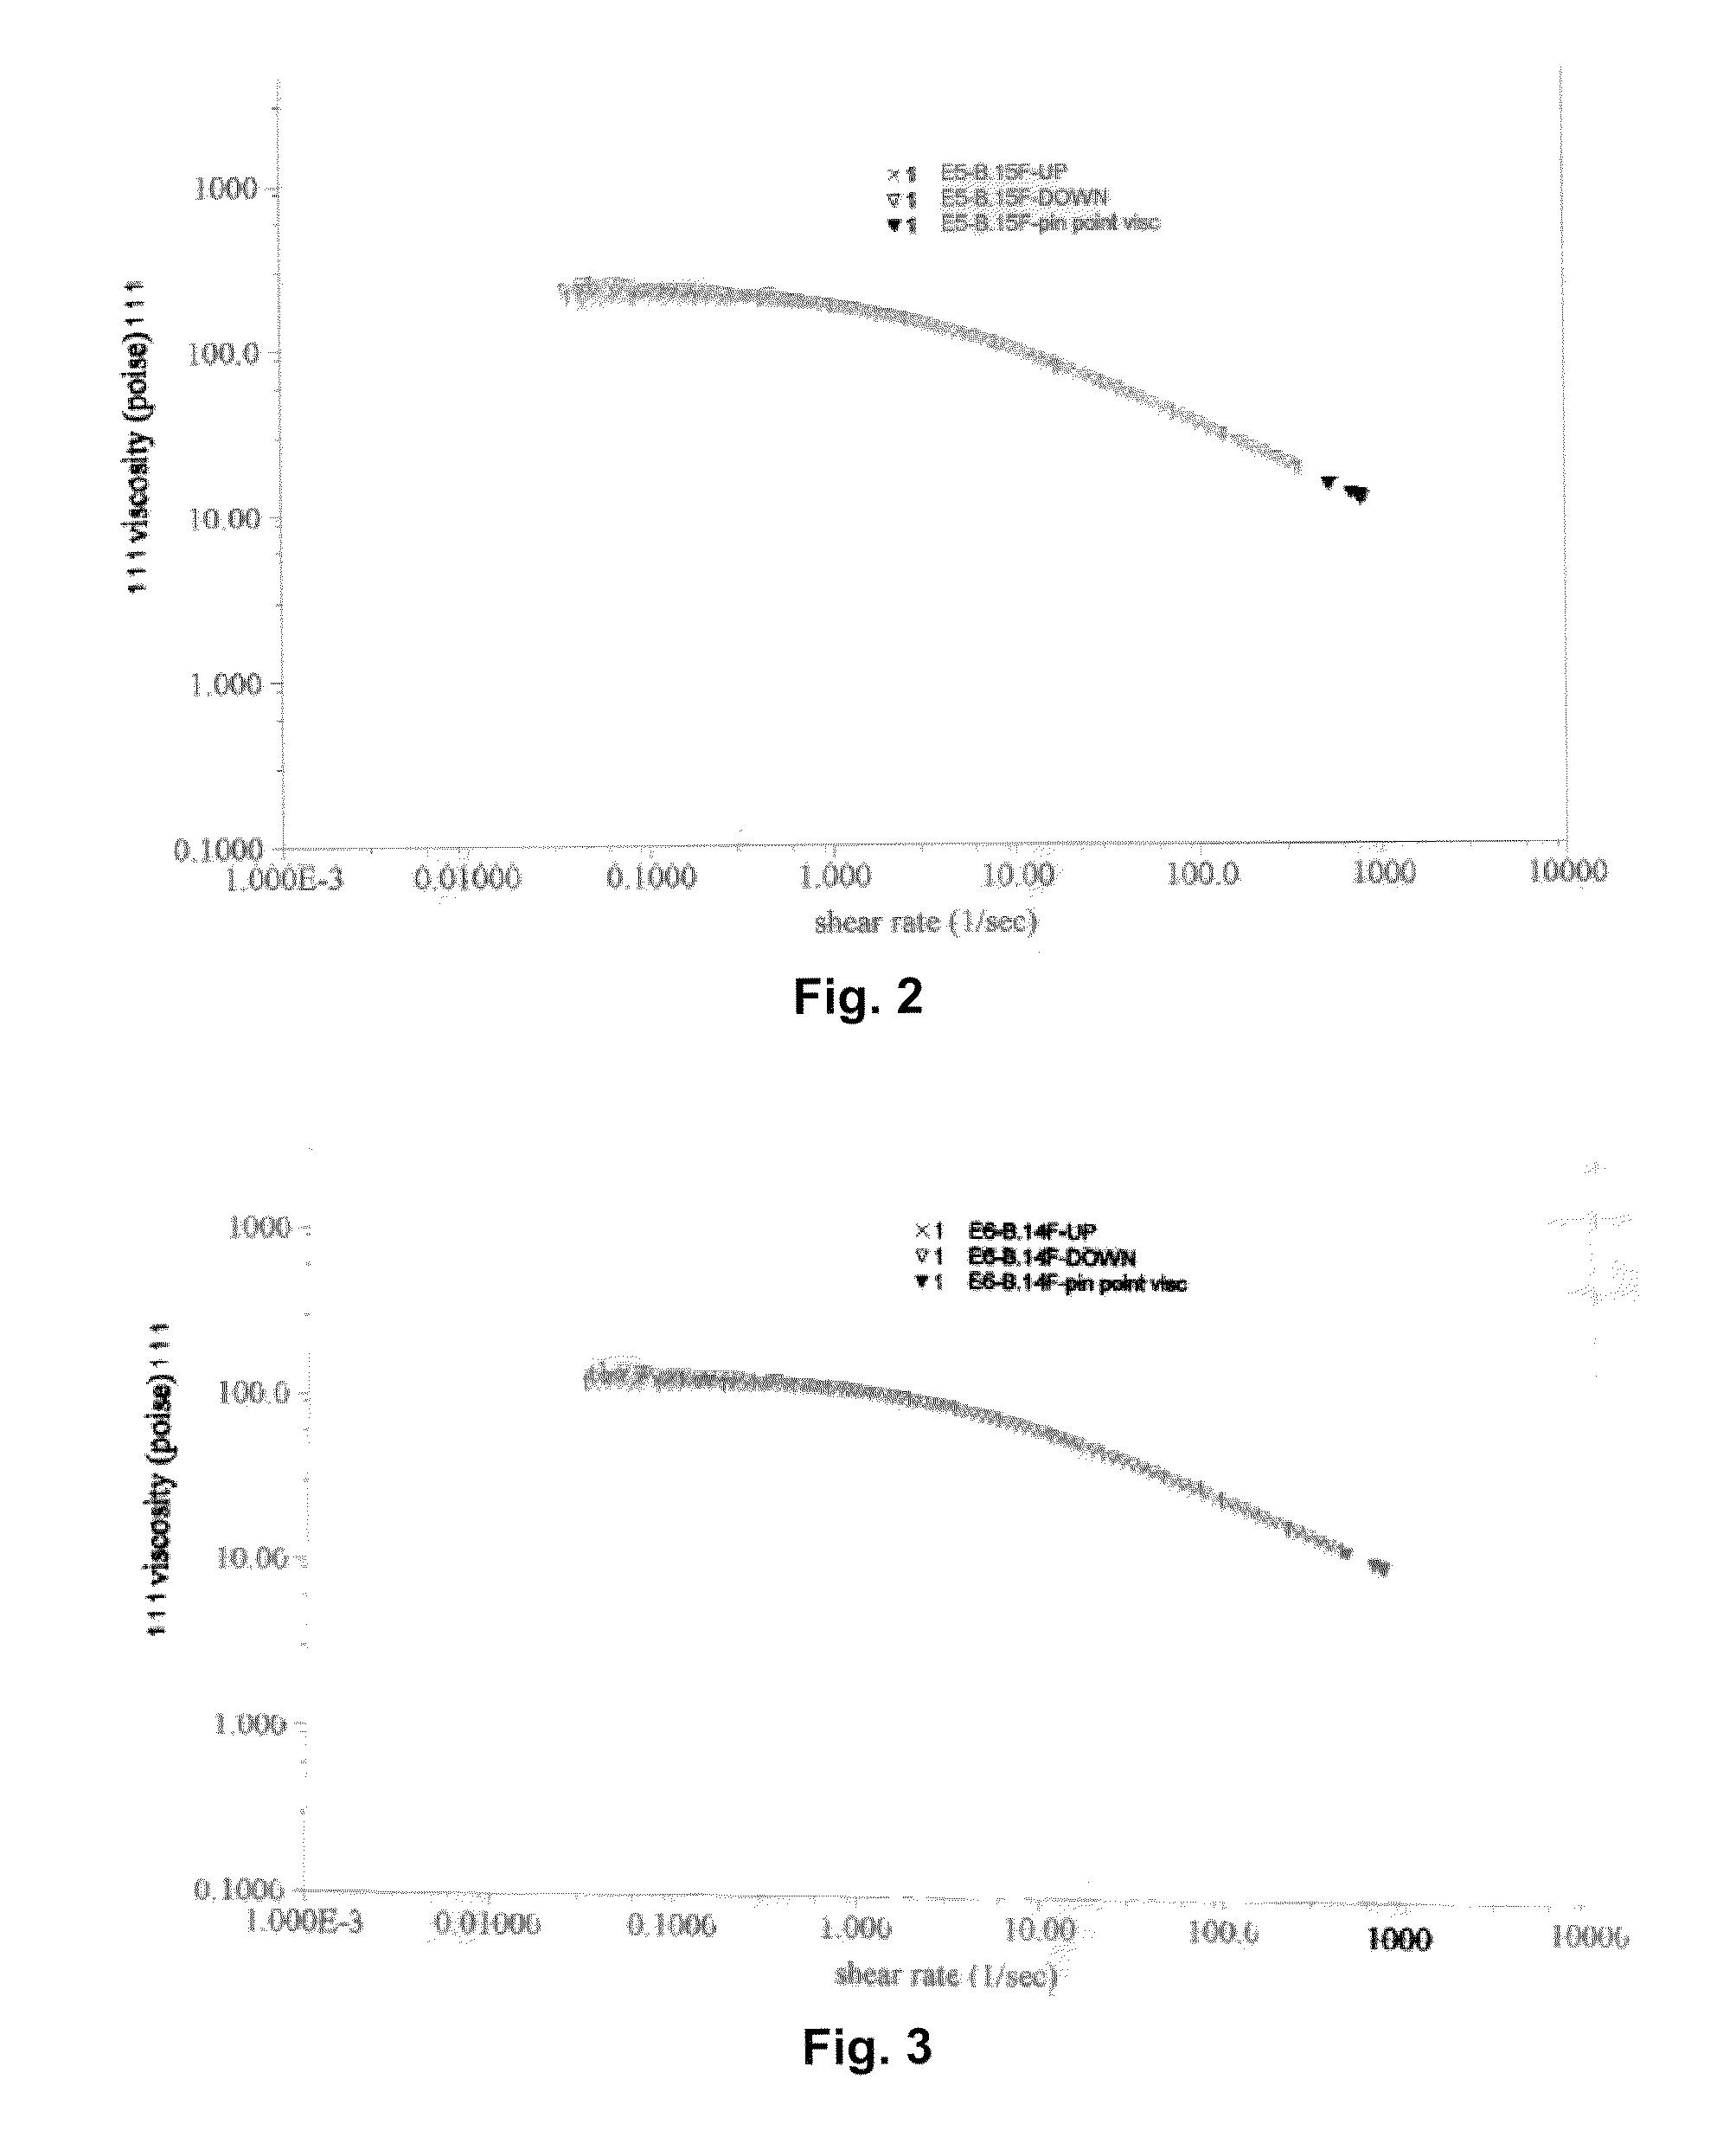 Electrolytic capacitor containing a liquid electrolyte